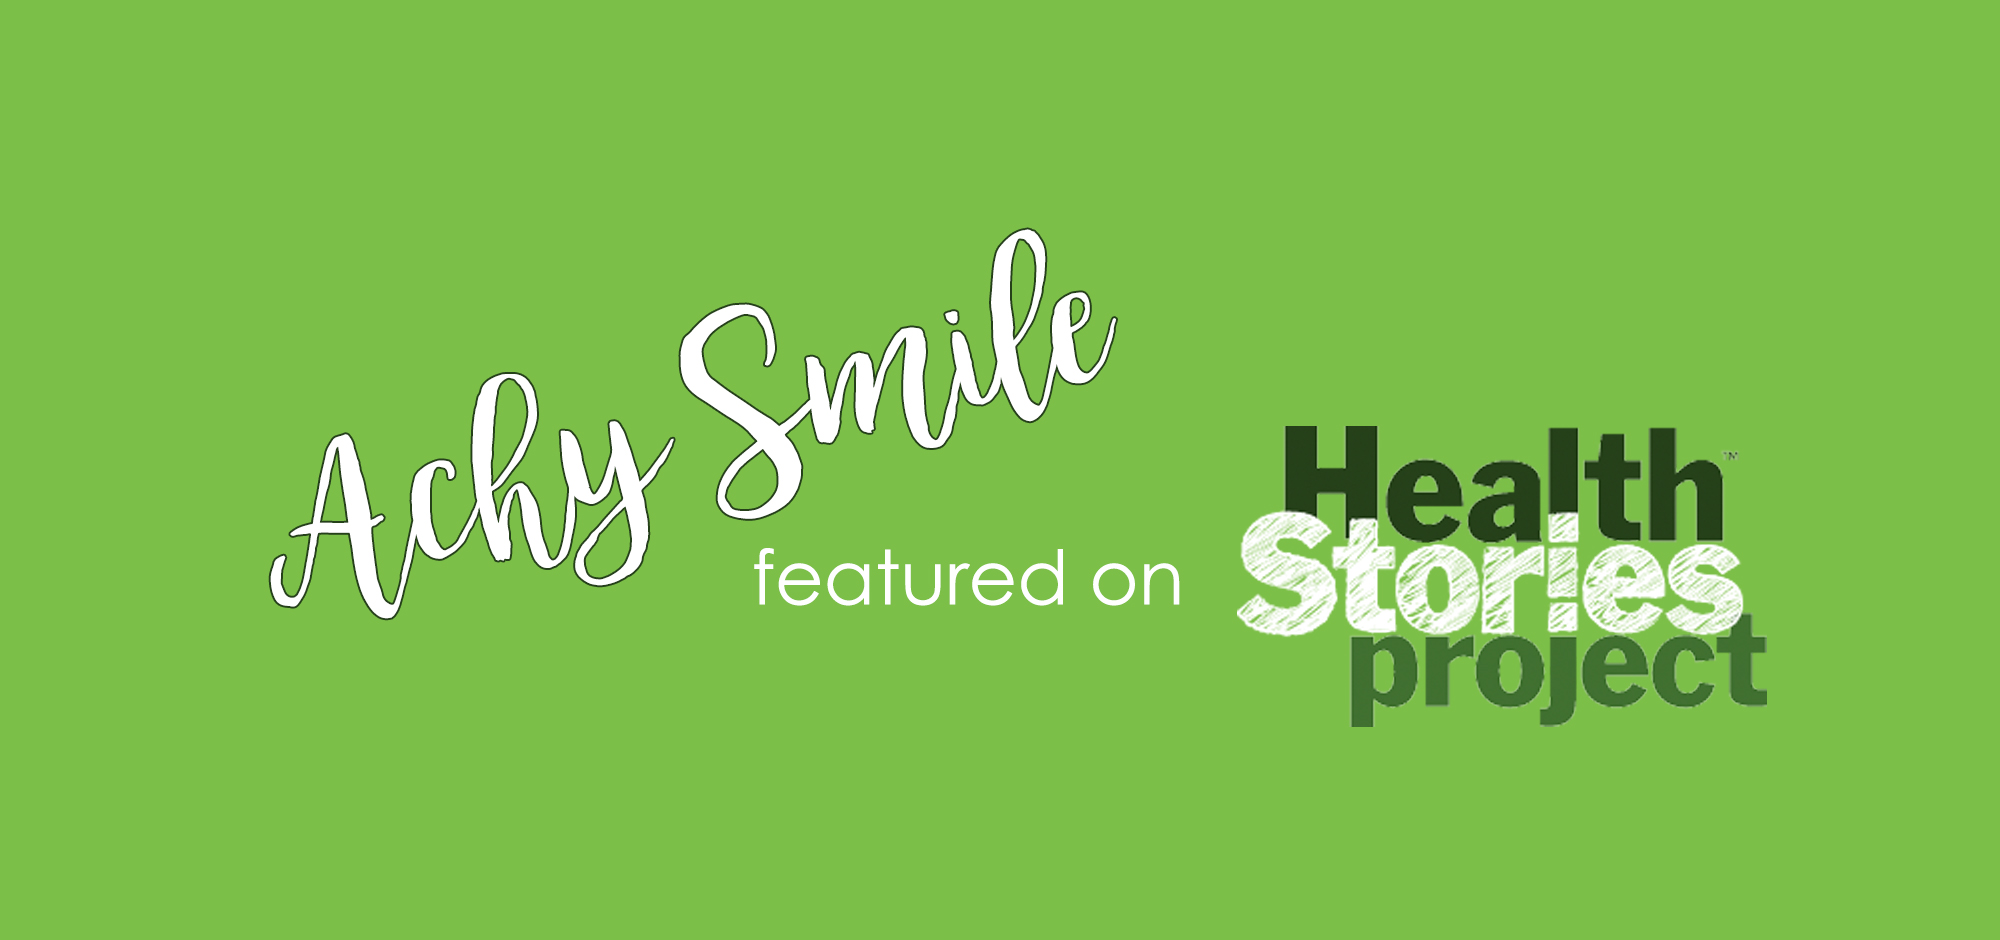 Achy Smile Featured on Health Stories Project